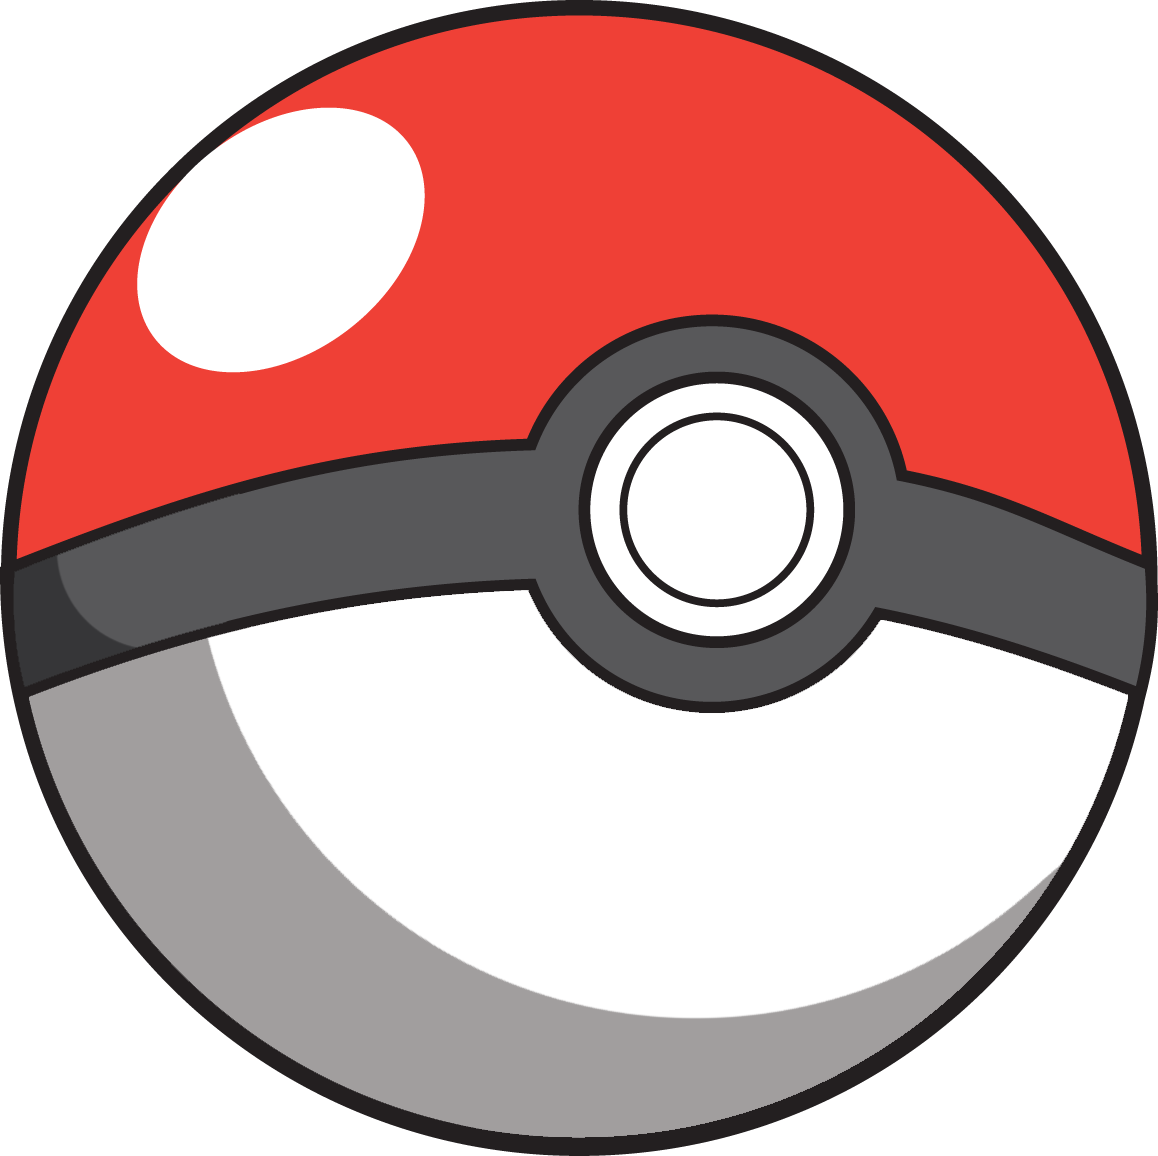 Pokeball clipart free download on WebStockReview